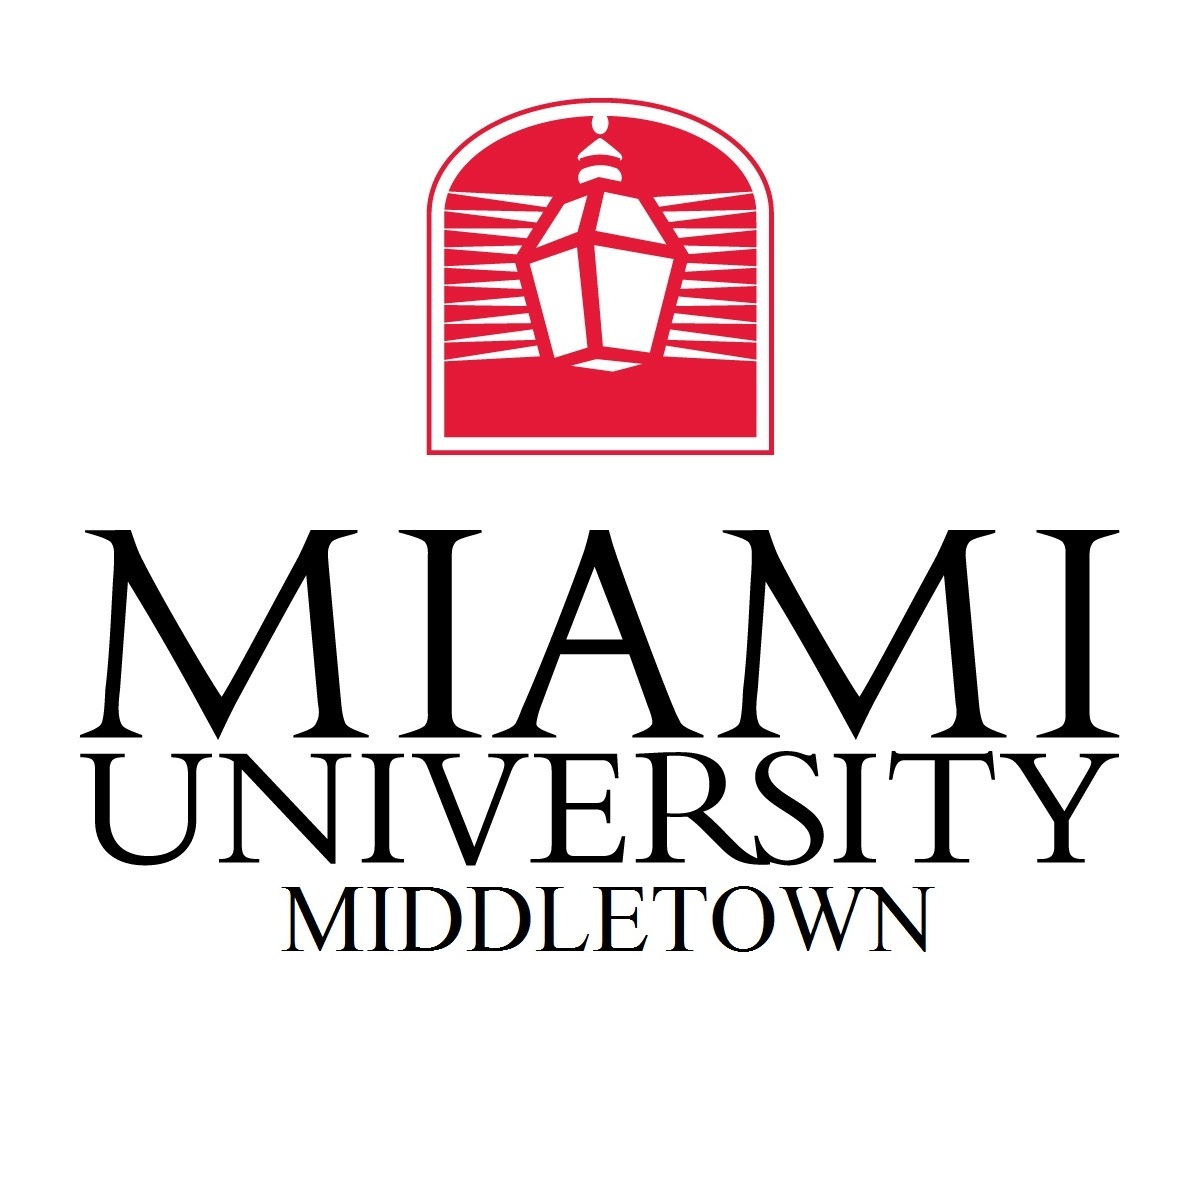 Miami University Middletown’s Verity Traditions